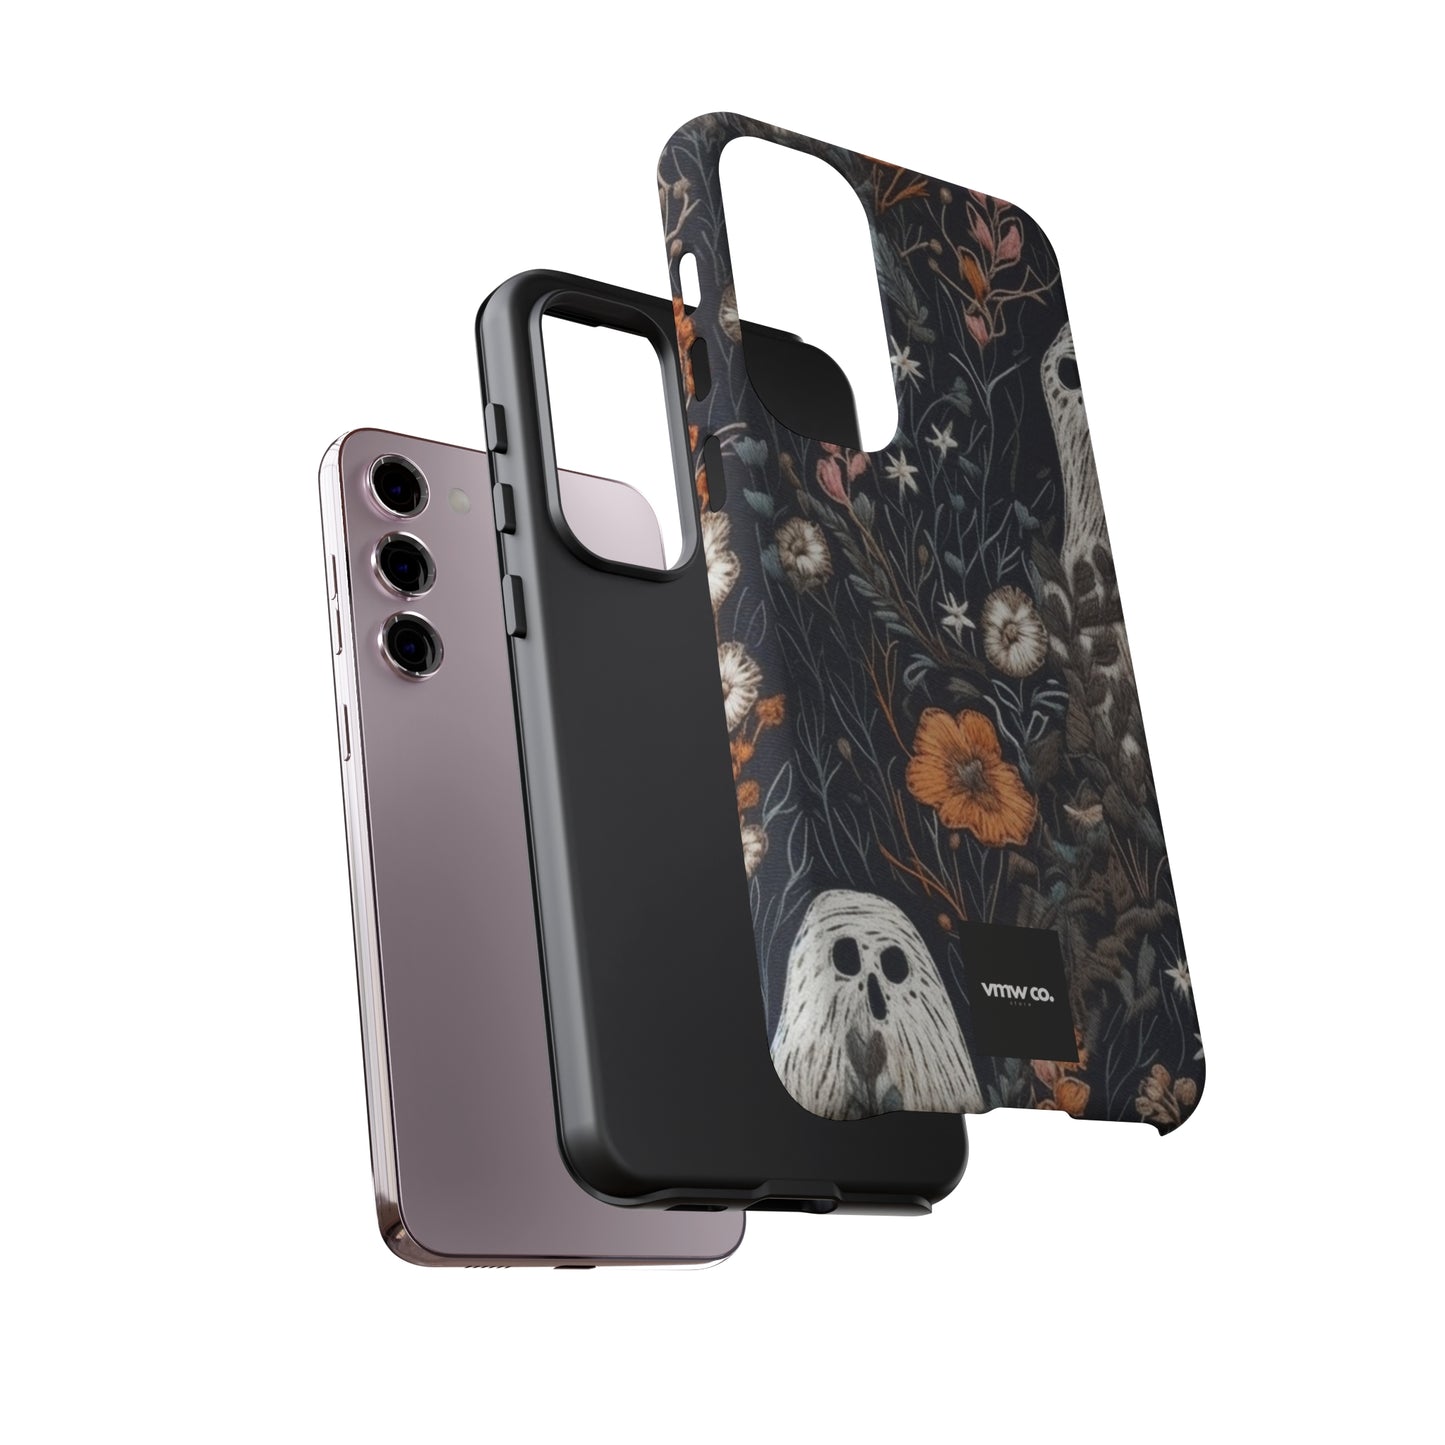 Ghost in Meadow Android Tough Cases